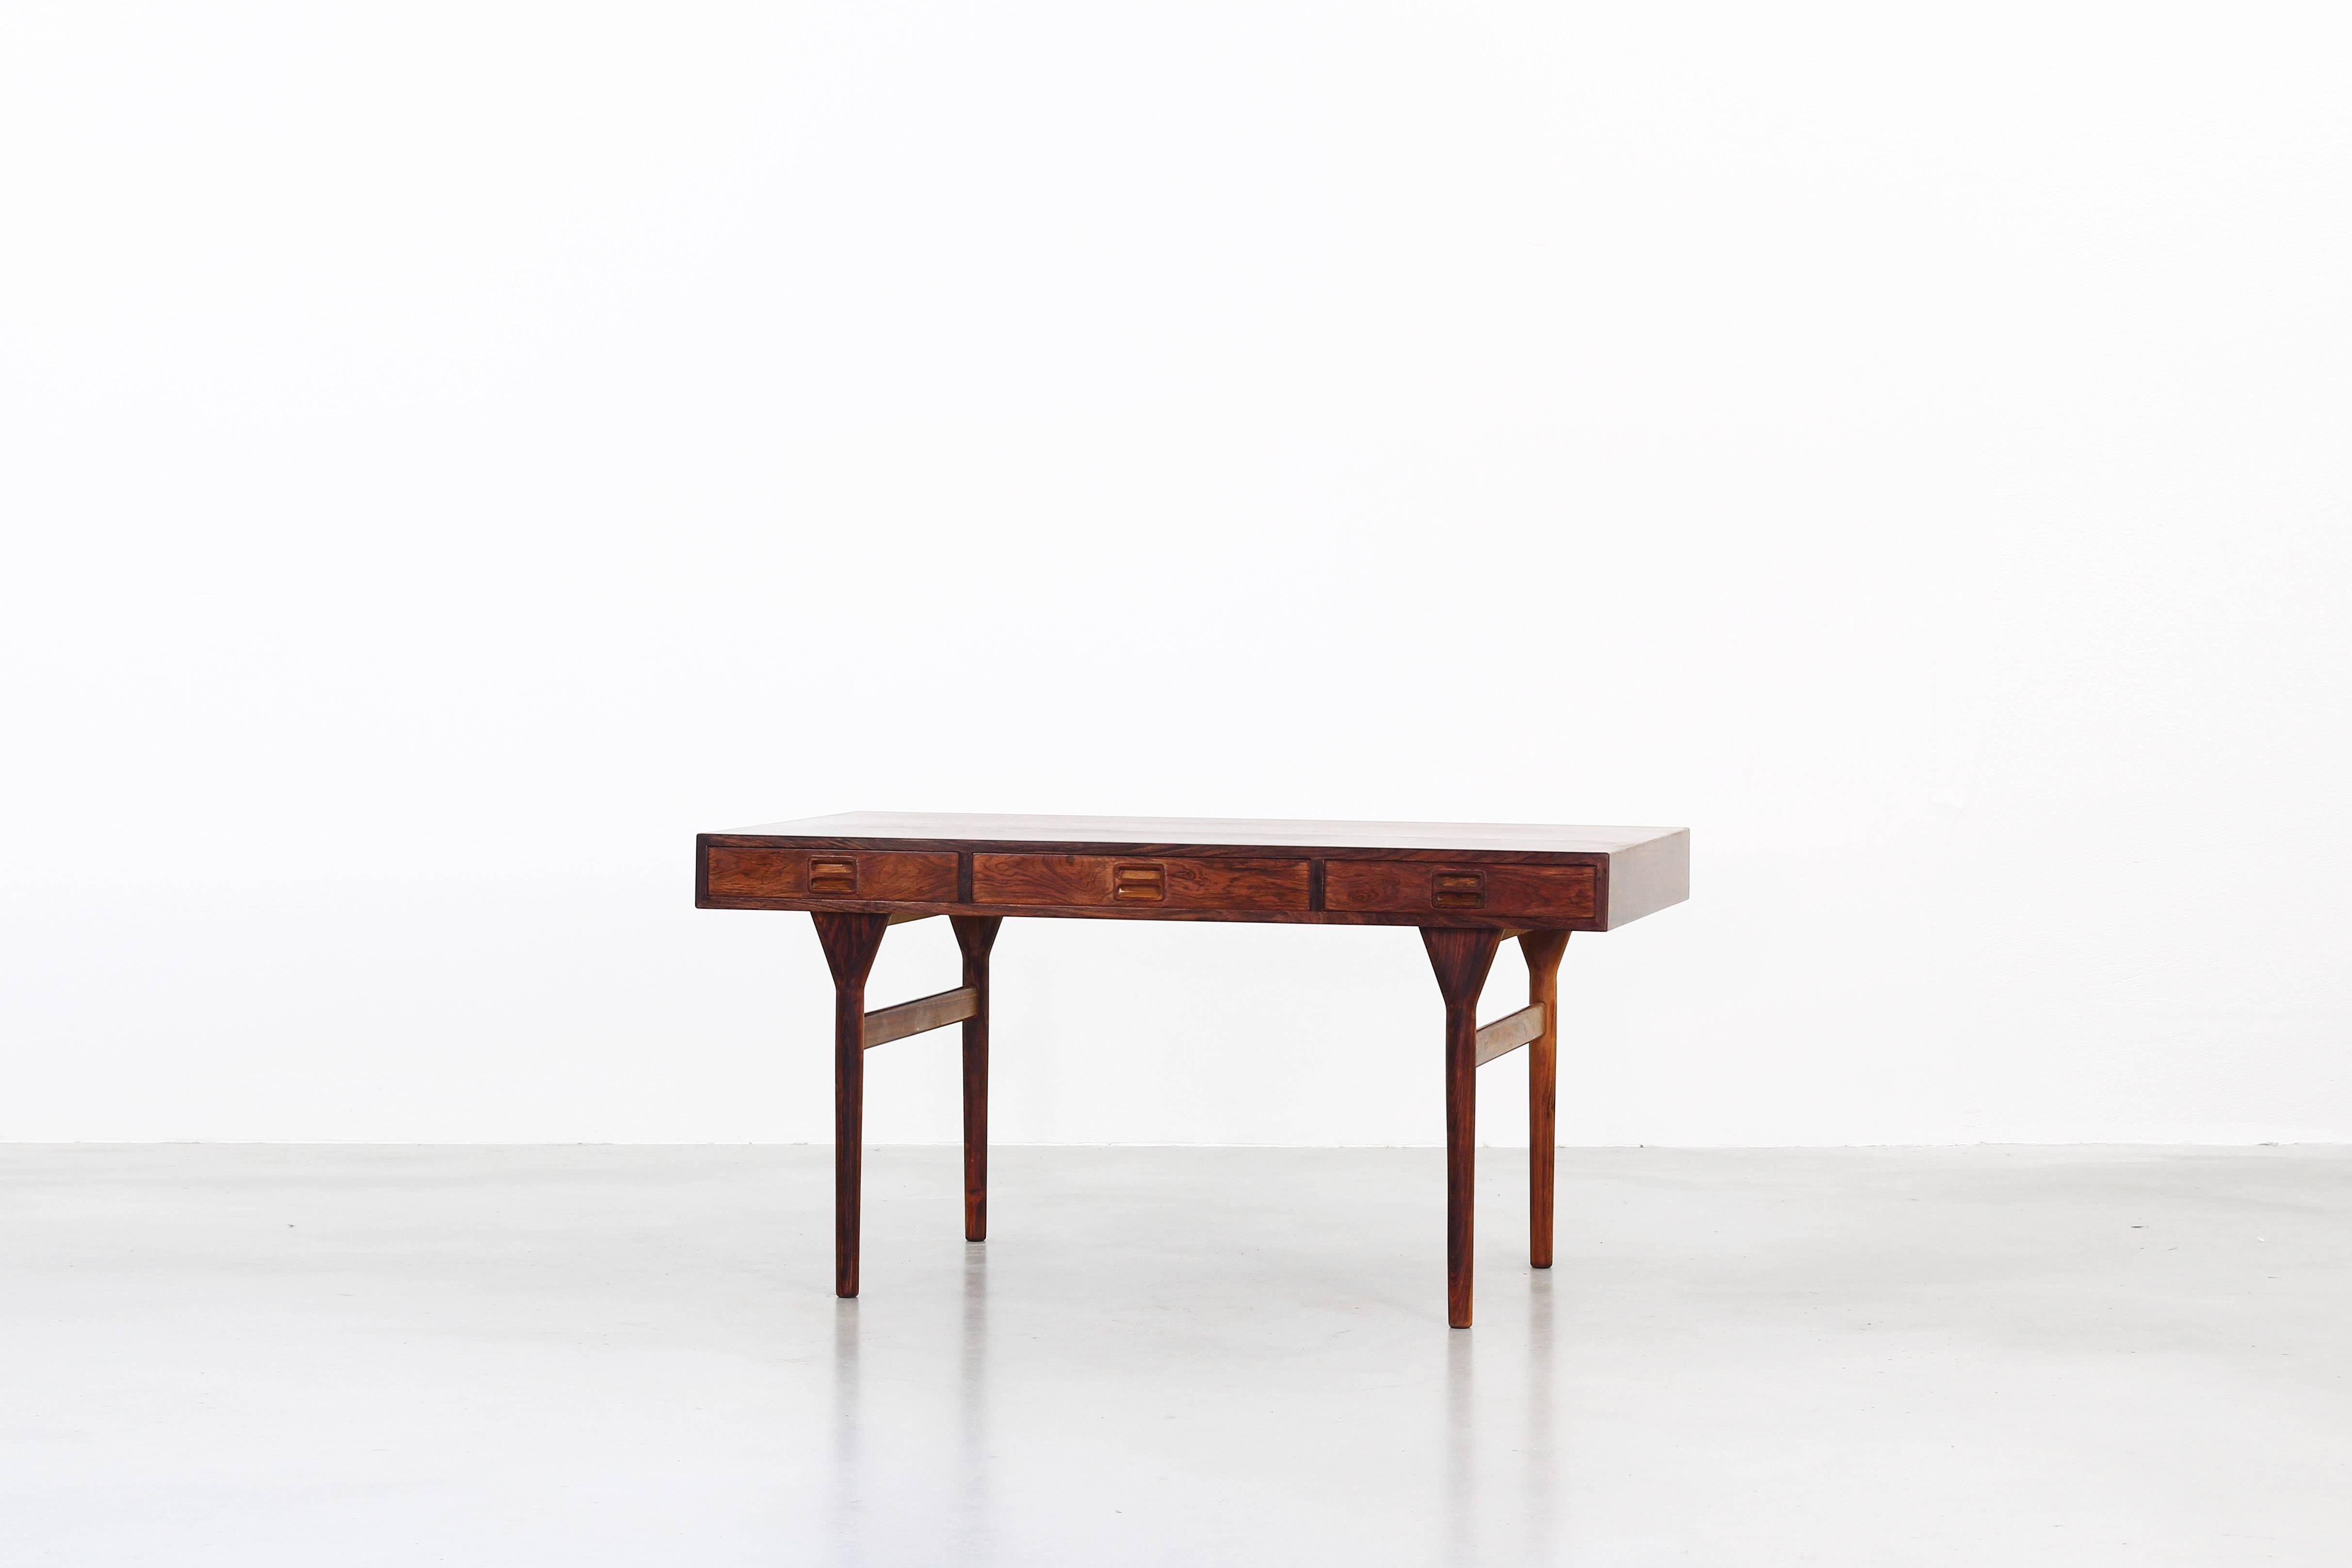 Very beautiful desk designed by Nanna Ditzel for Søren Willadsen Møbelfabrik, made in Denmark in 1955. The desk is made of rosewood and comes with three drawers.